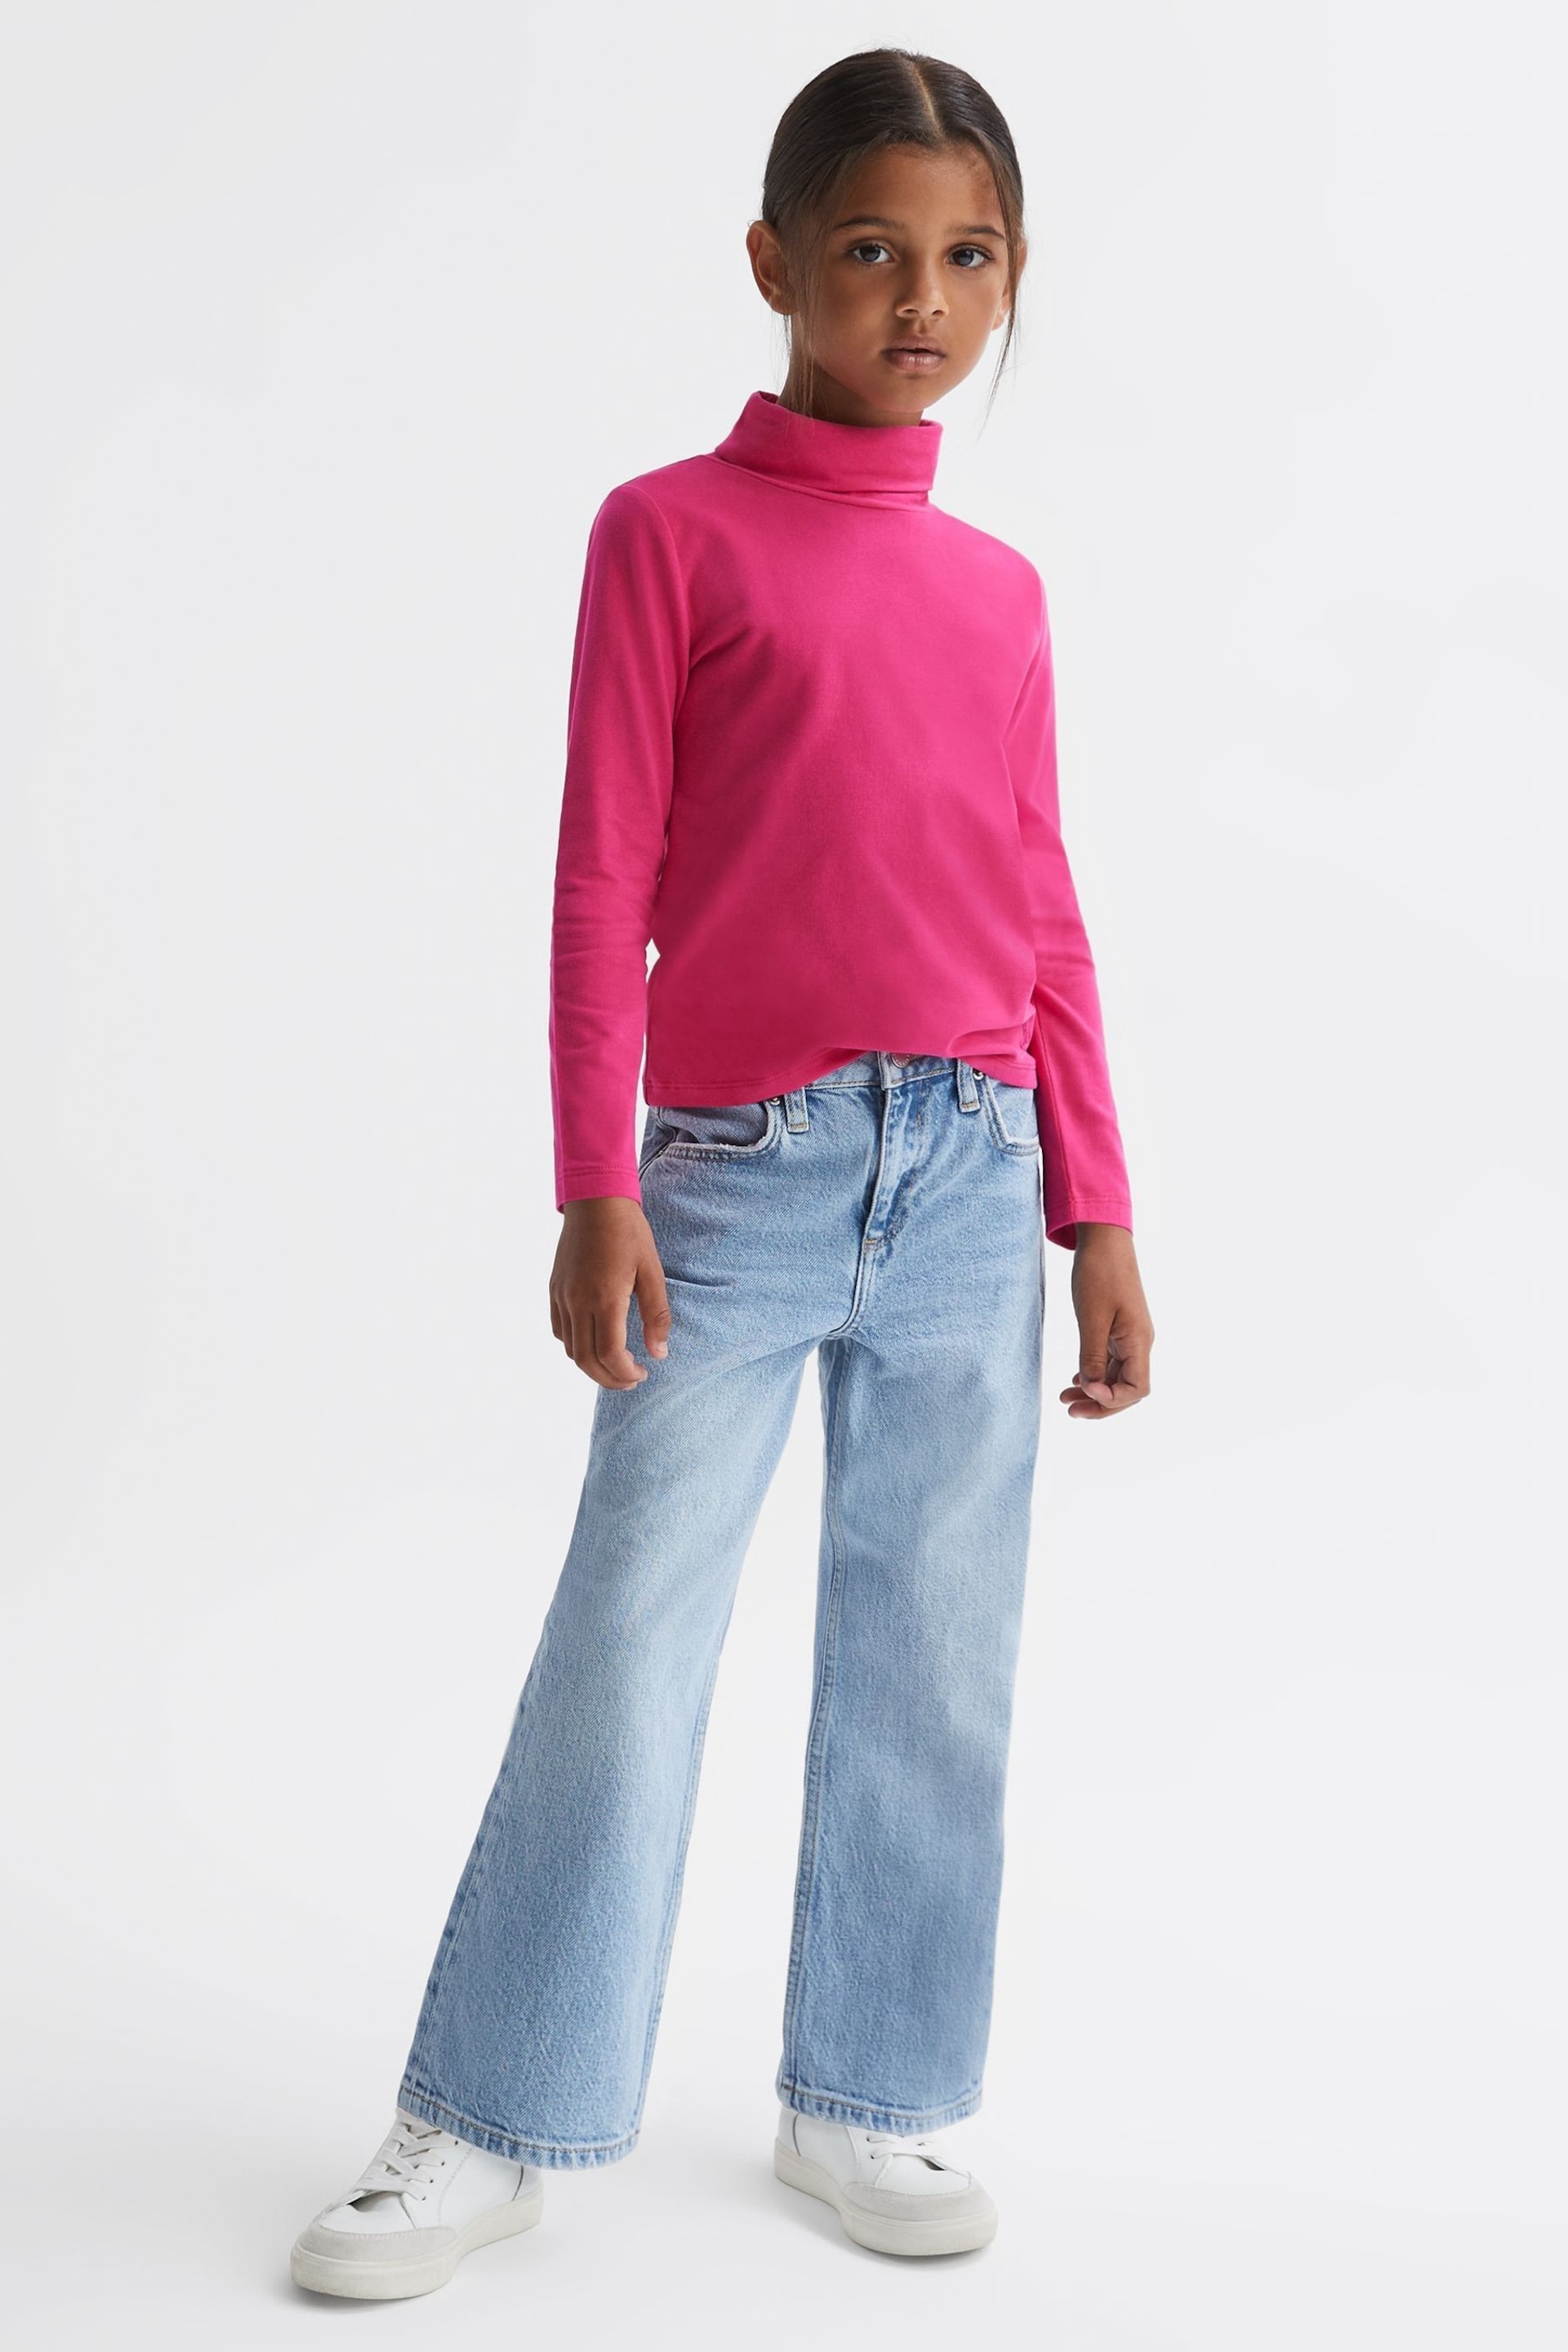 Reiss Bright Pink Carey Junior Cotton Blend Roll Neck Top - Image 3 of 5